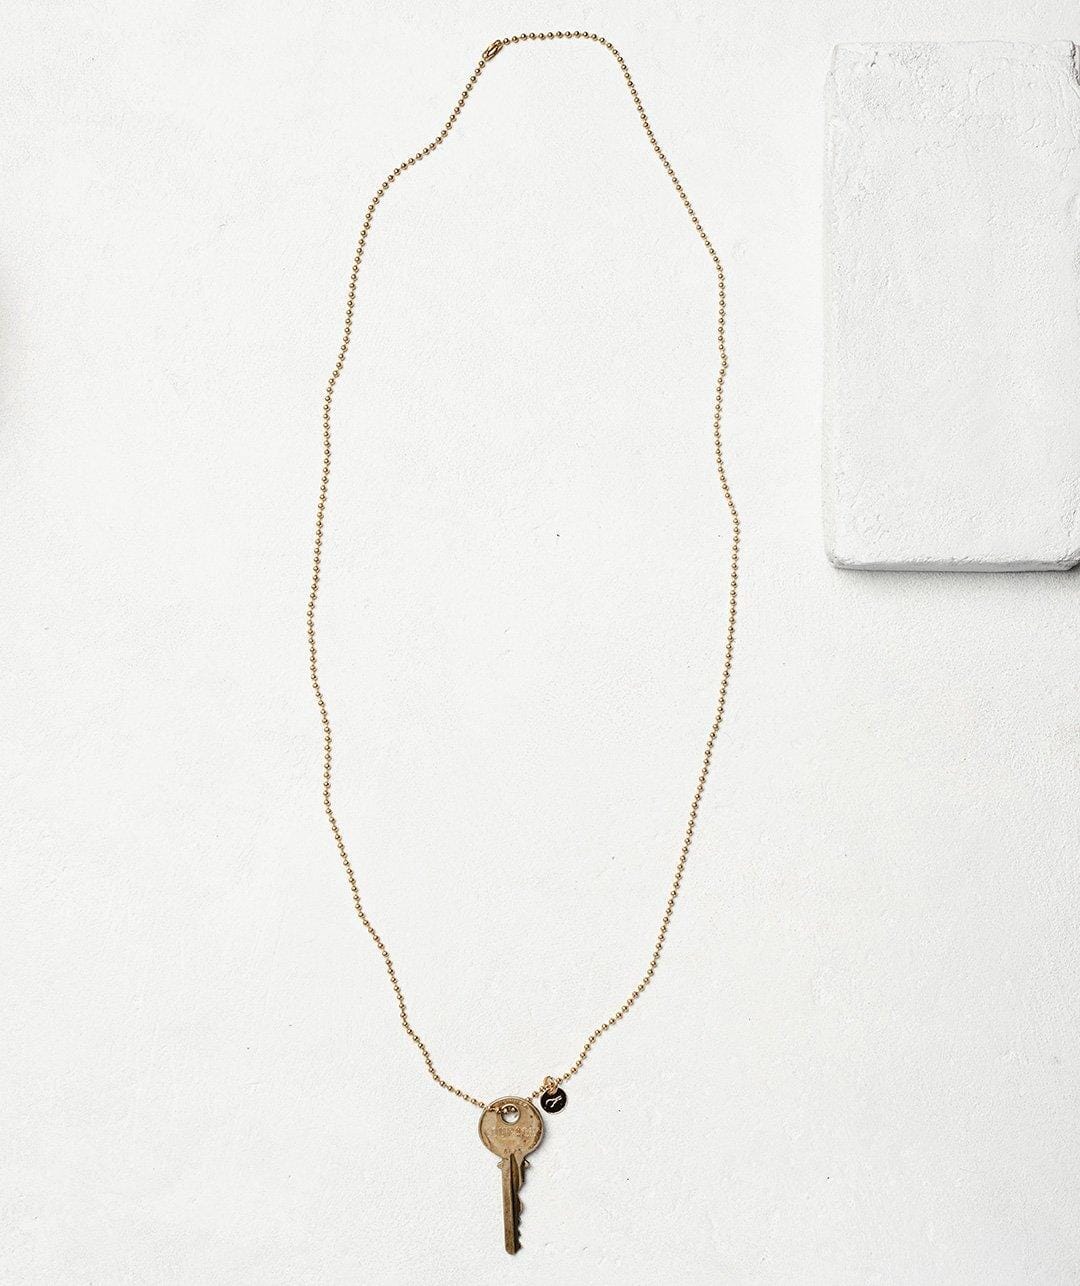 N - Classic Key Necklace Necklaces The Giving Keys 